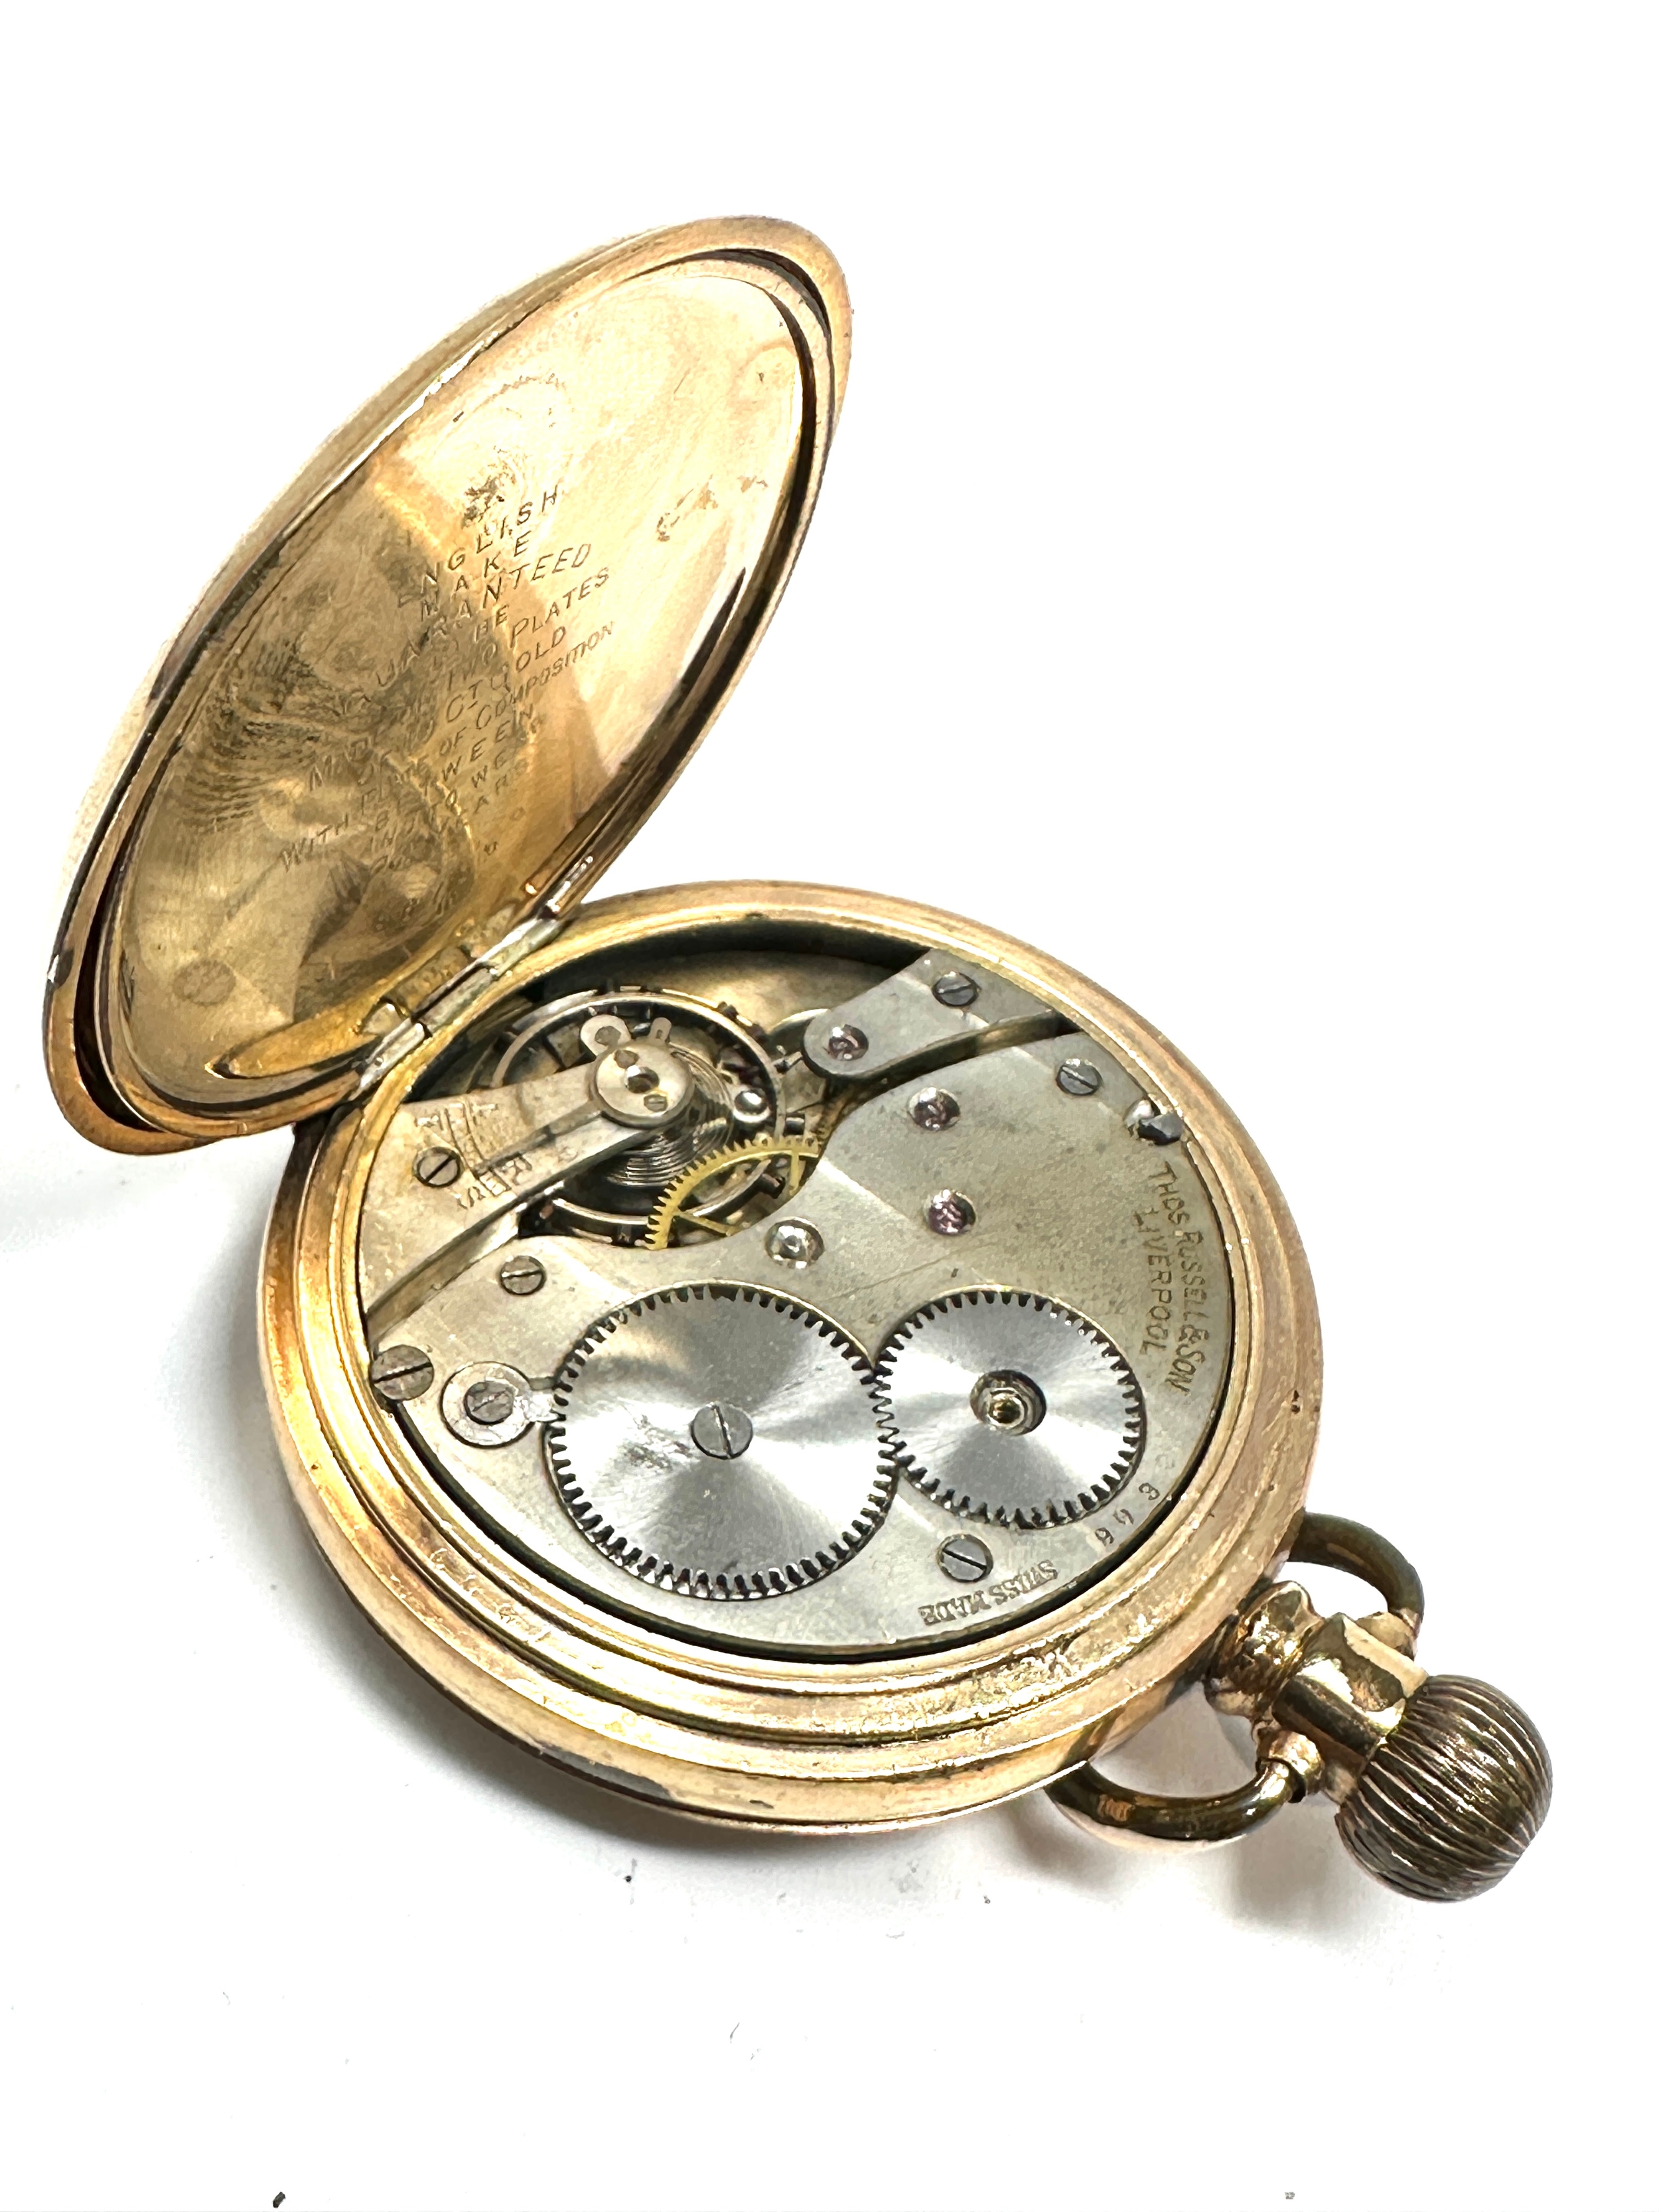 Gold plated tho russell & sons full hunter pocket watch the watch is not ticking - Image 3 of 3